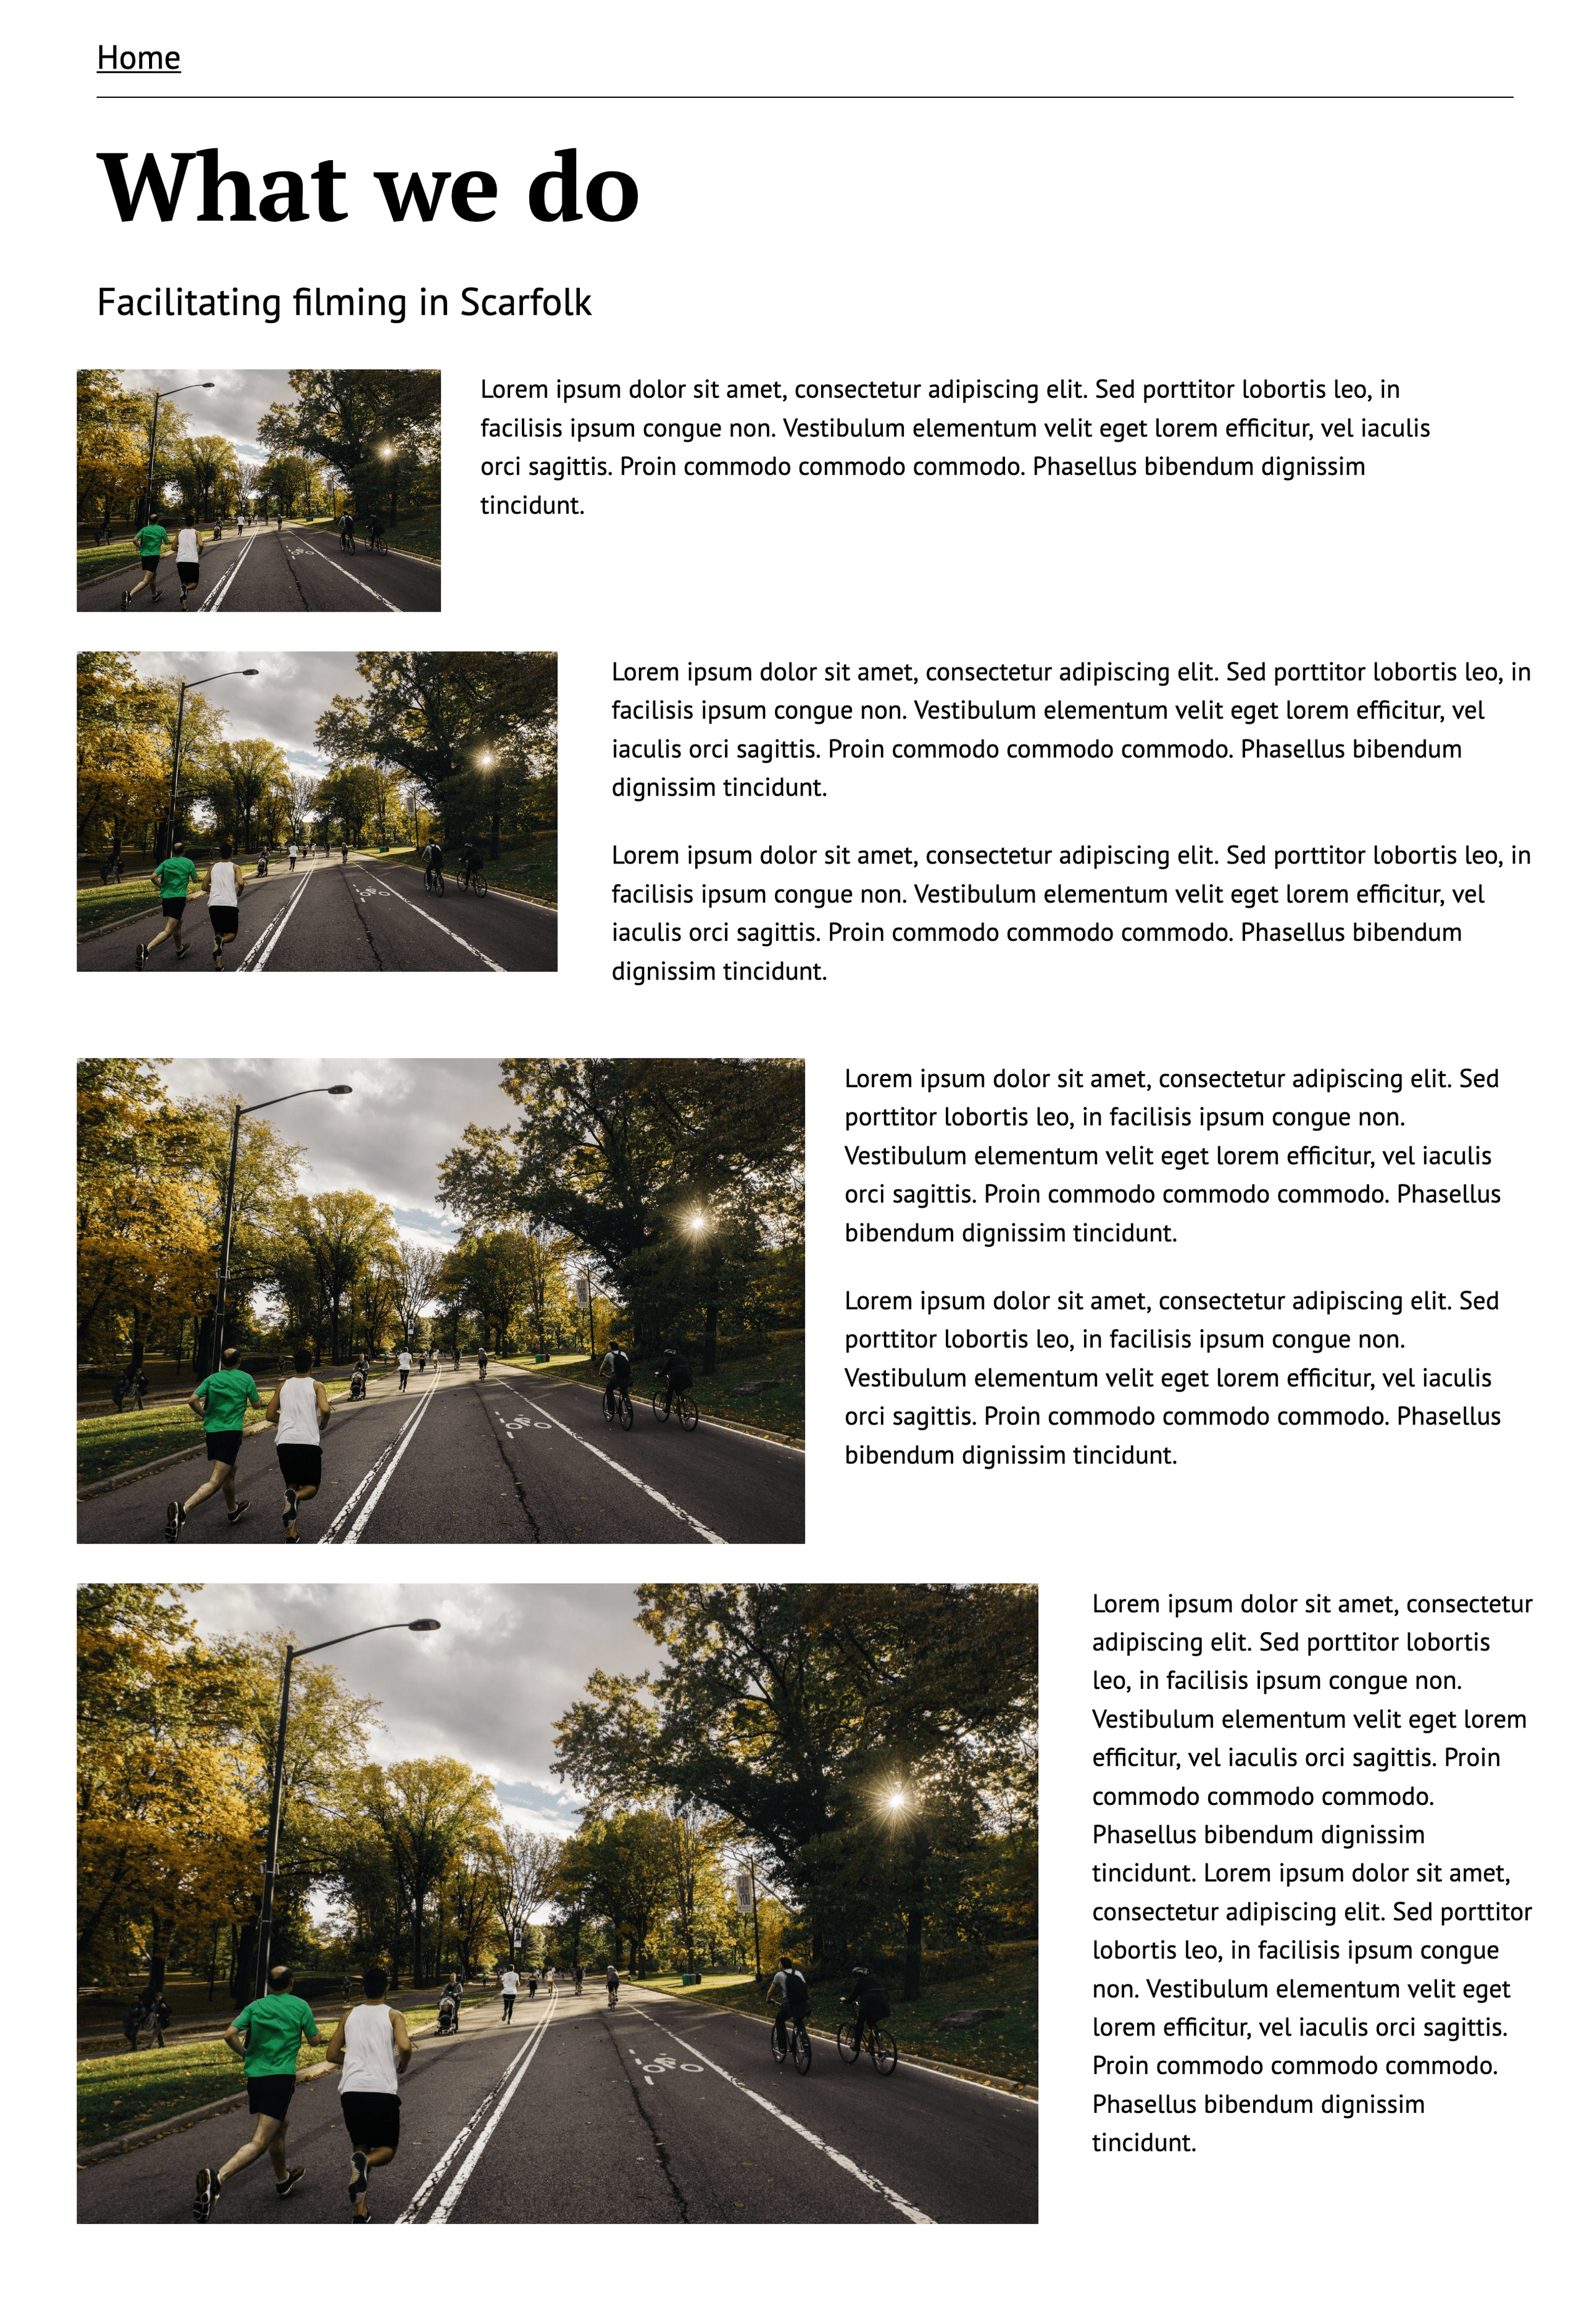 Flexible width of images and text in paragraphs